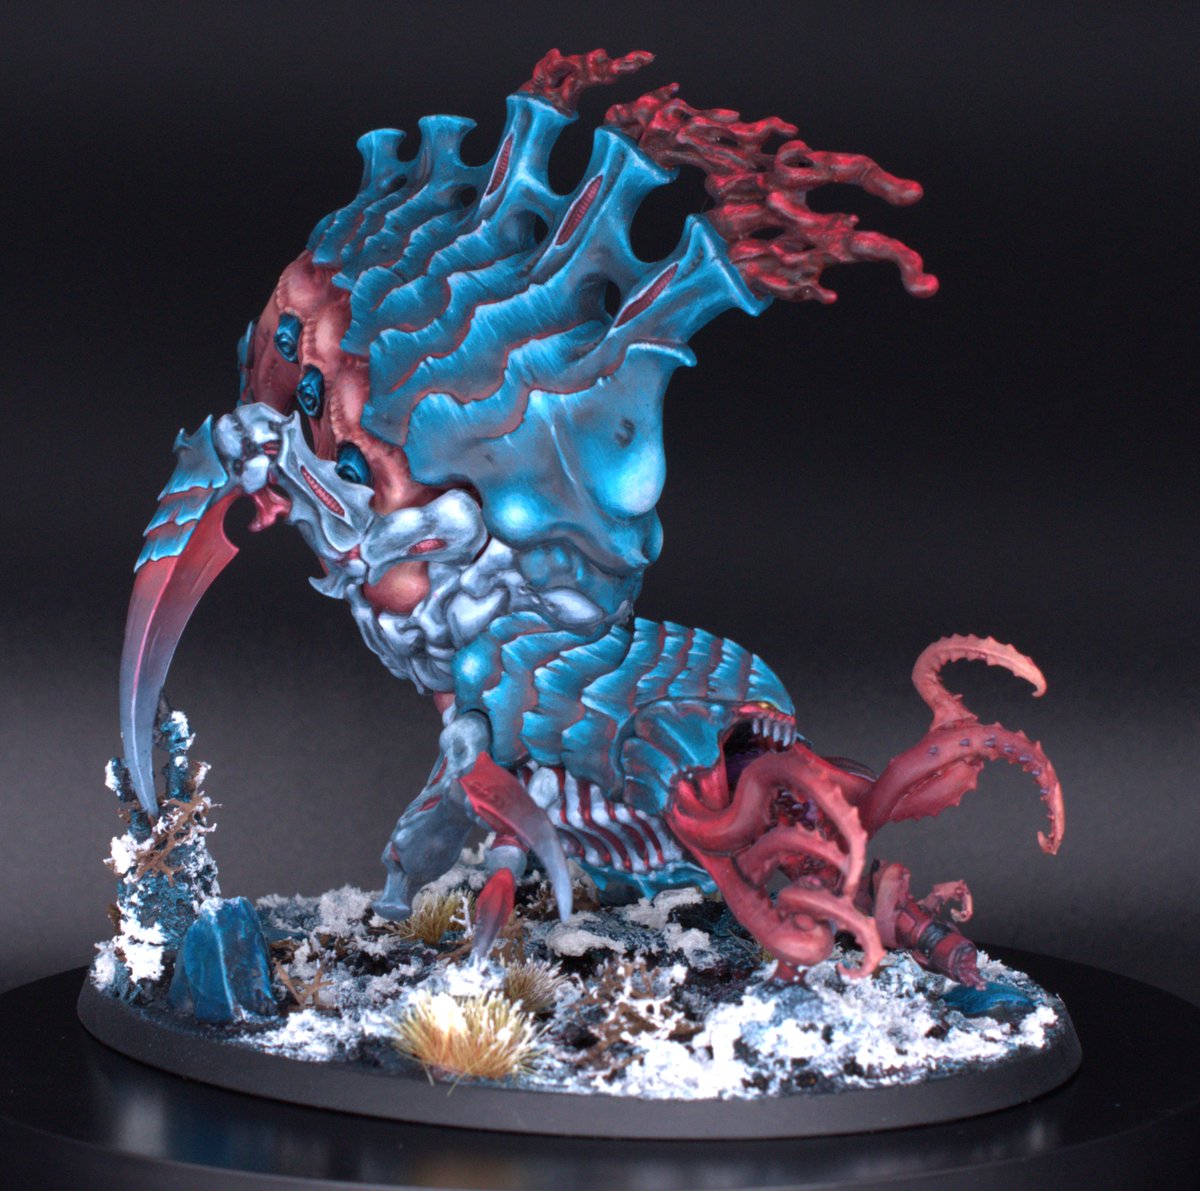 Have some new photos! Of old models! Because YOU CAN'T STOP ME!*

*unless you ask me nicely in which case oh god I'm really sorry please forgive me

@warhammer #WarhammerCommunity #warhammer40k #tyranids #miniaturepainting